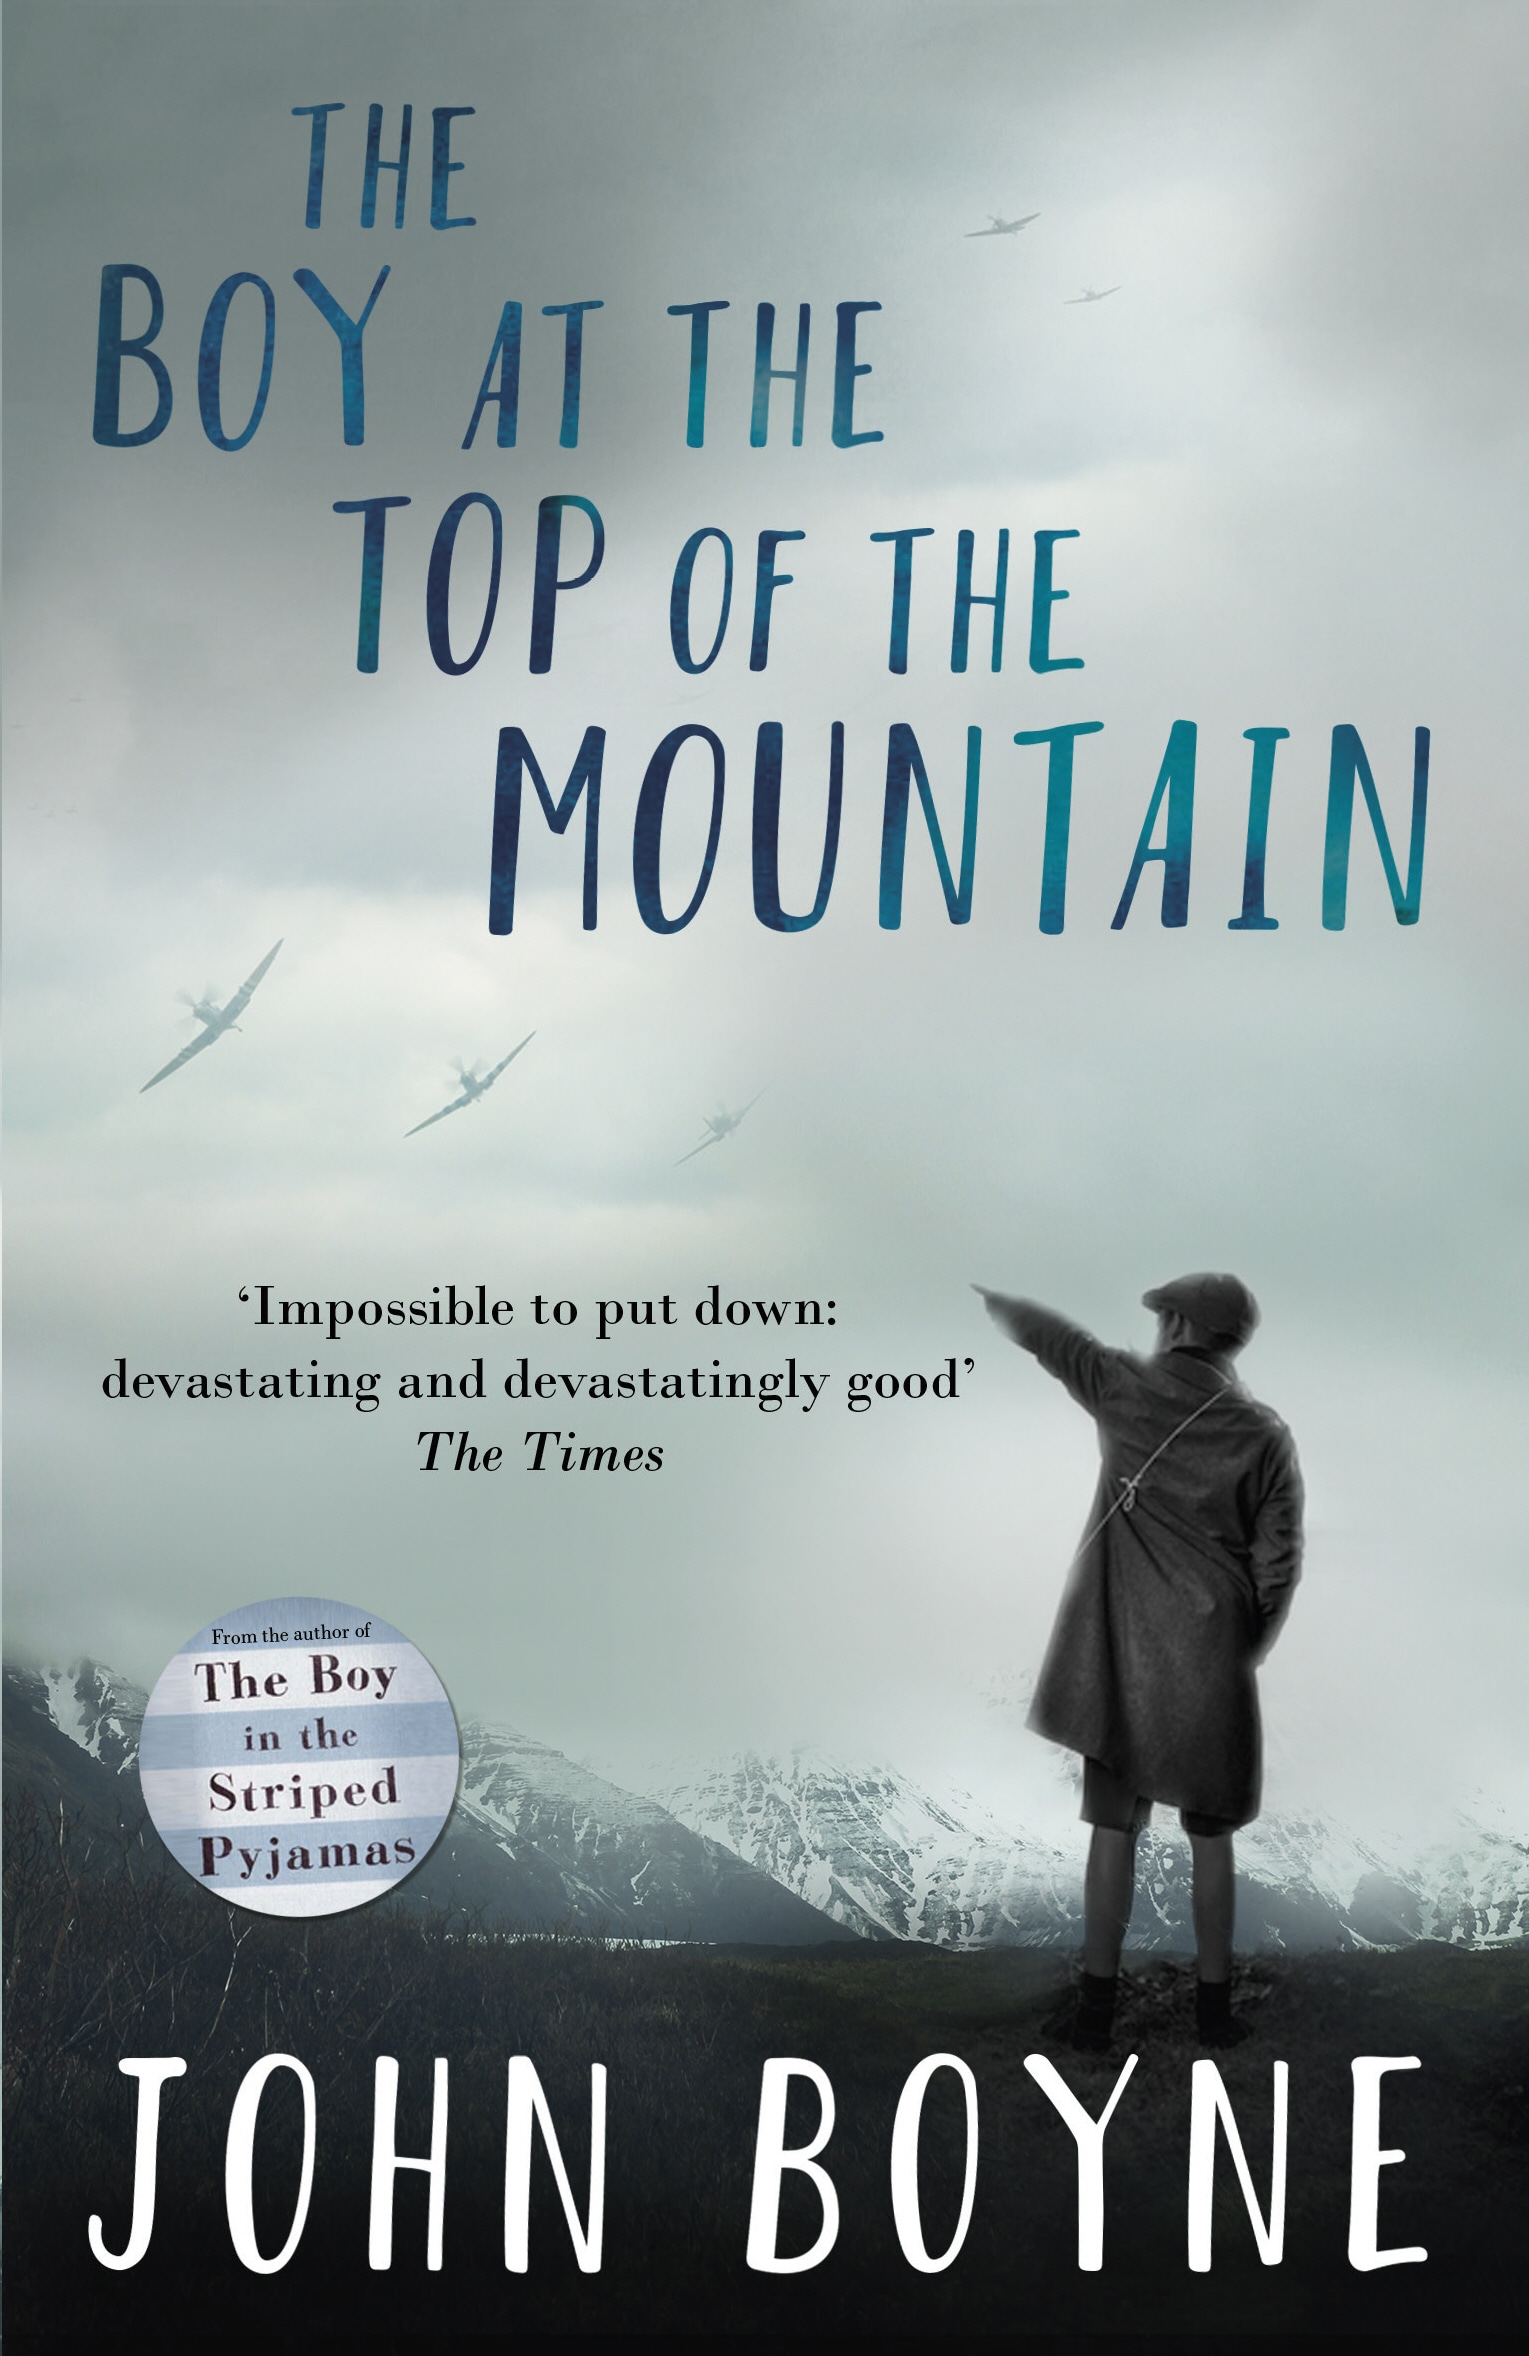 Book “The Boy at the Top of the Mountain” by John Boyne — June 2, 2016